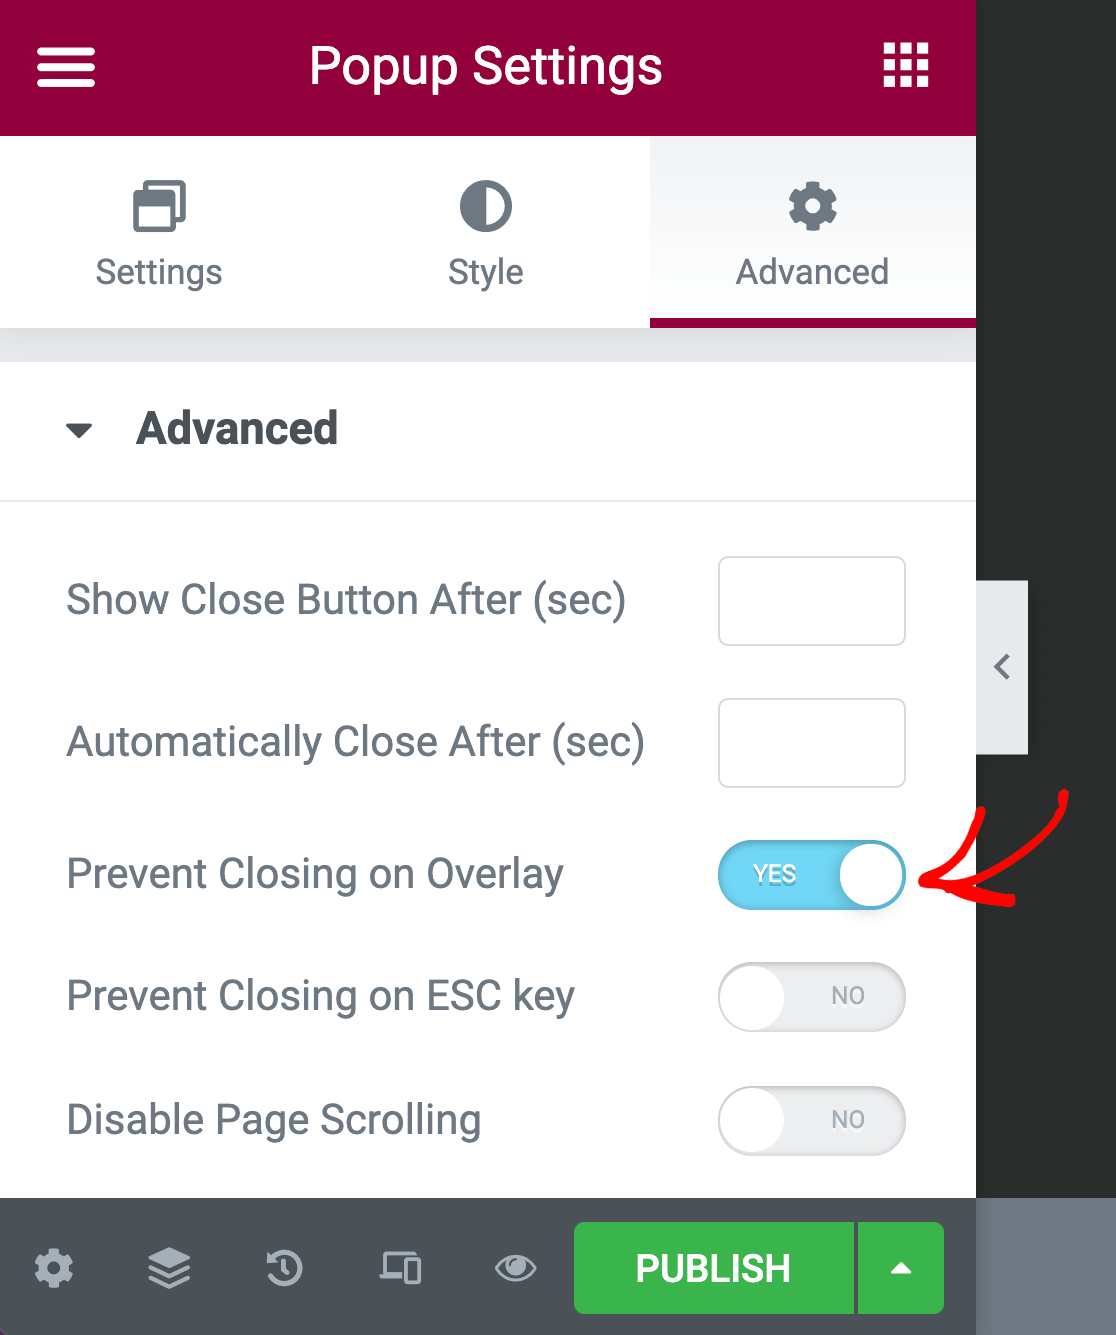 Turning on the Prevent Closing on Overly option for an Elementor popup